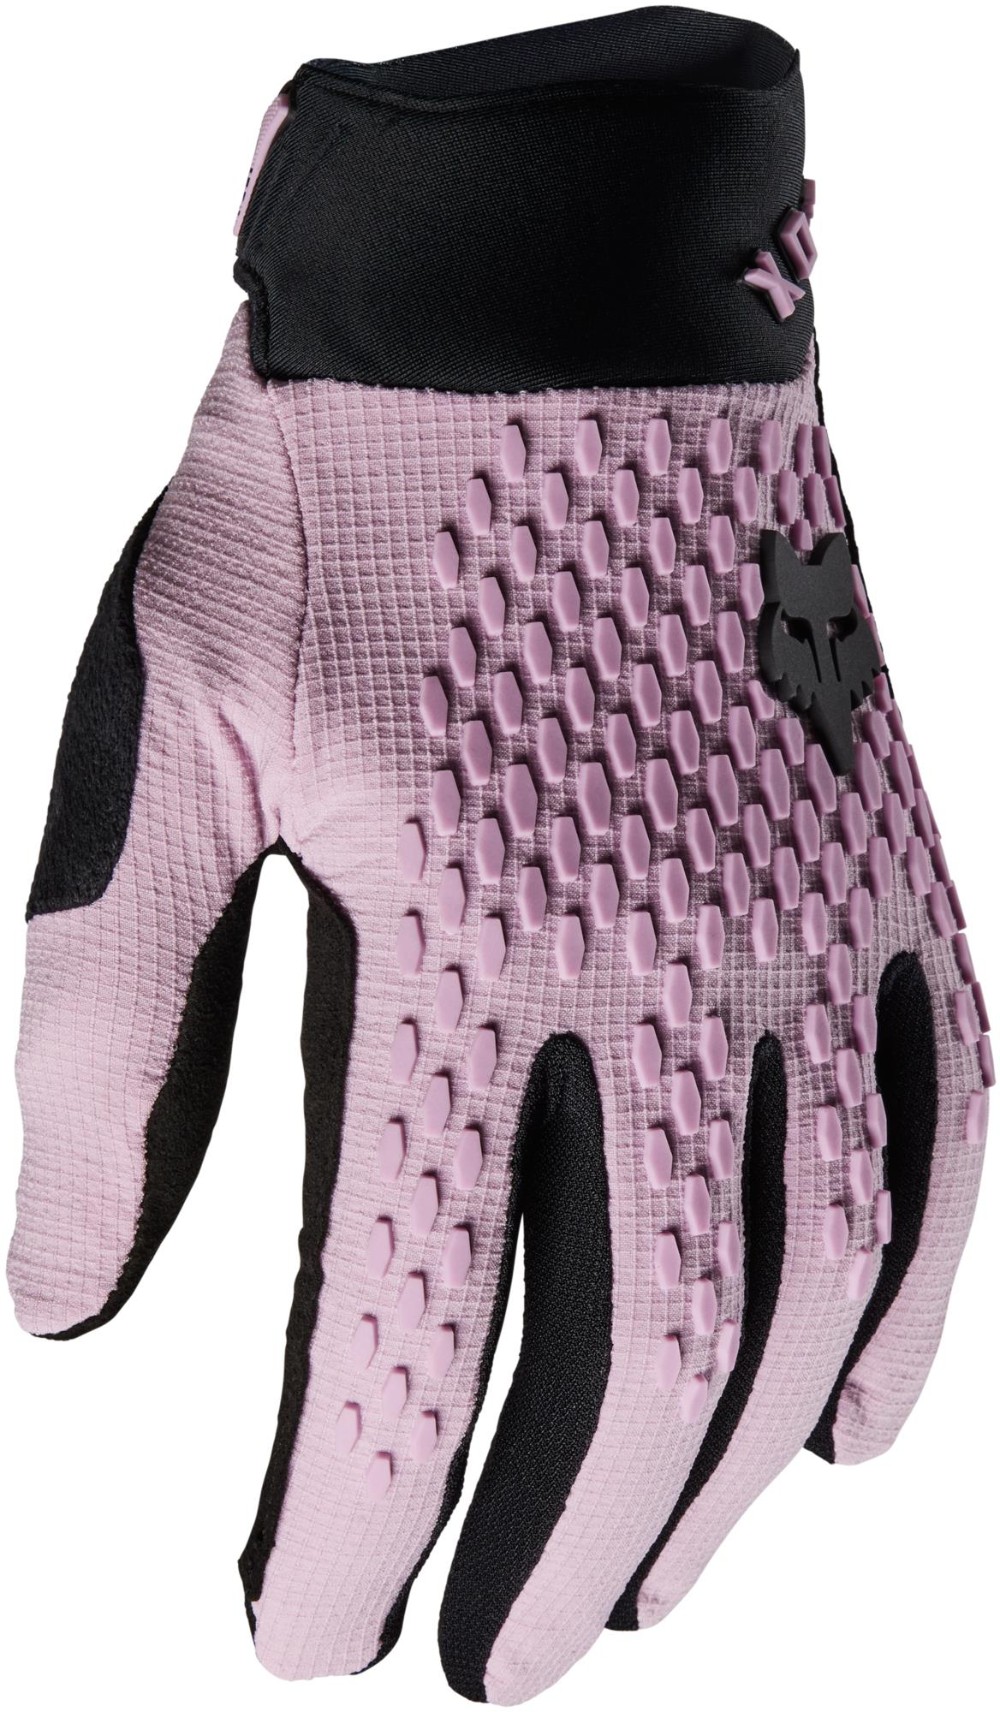 Defend Womens Long Finger Cycling Gloves TS57 image 0